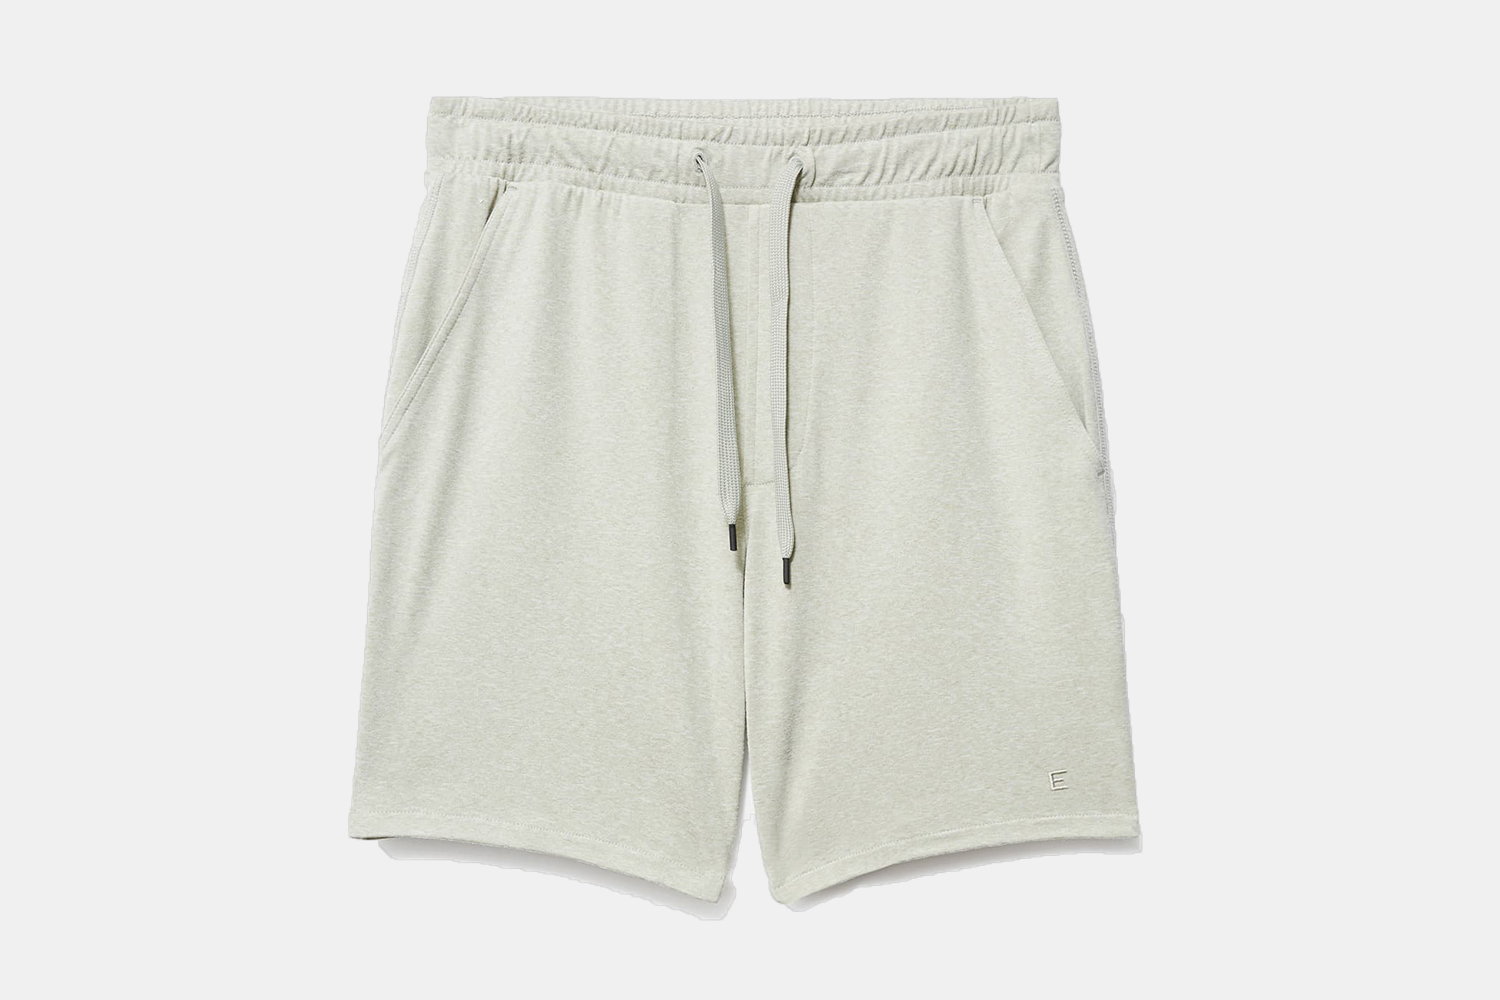 A pair of Everlane's men's ReNew Air Shorts in light green on a grey background